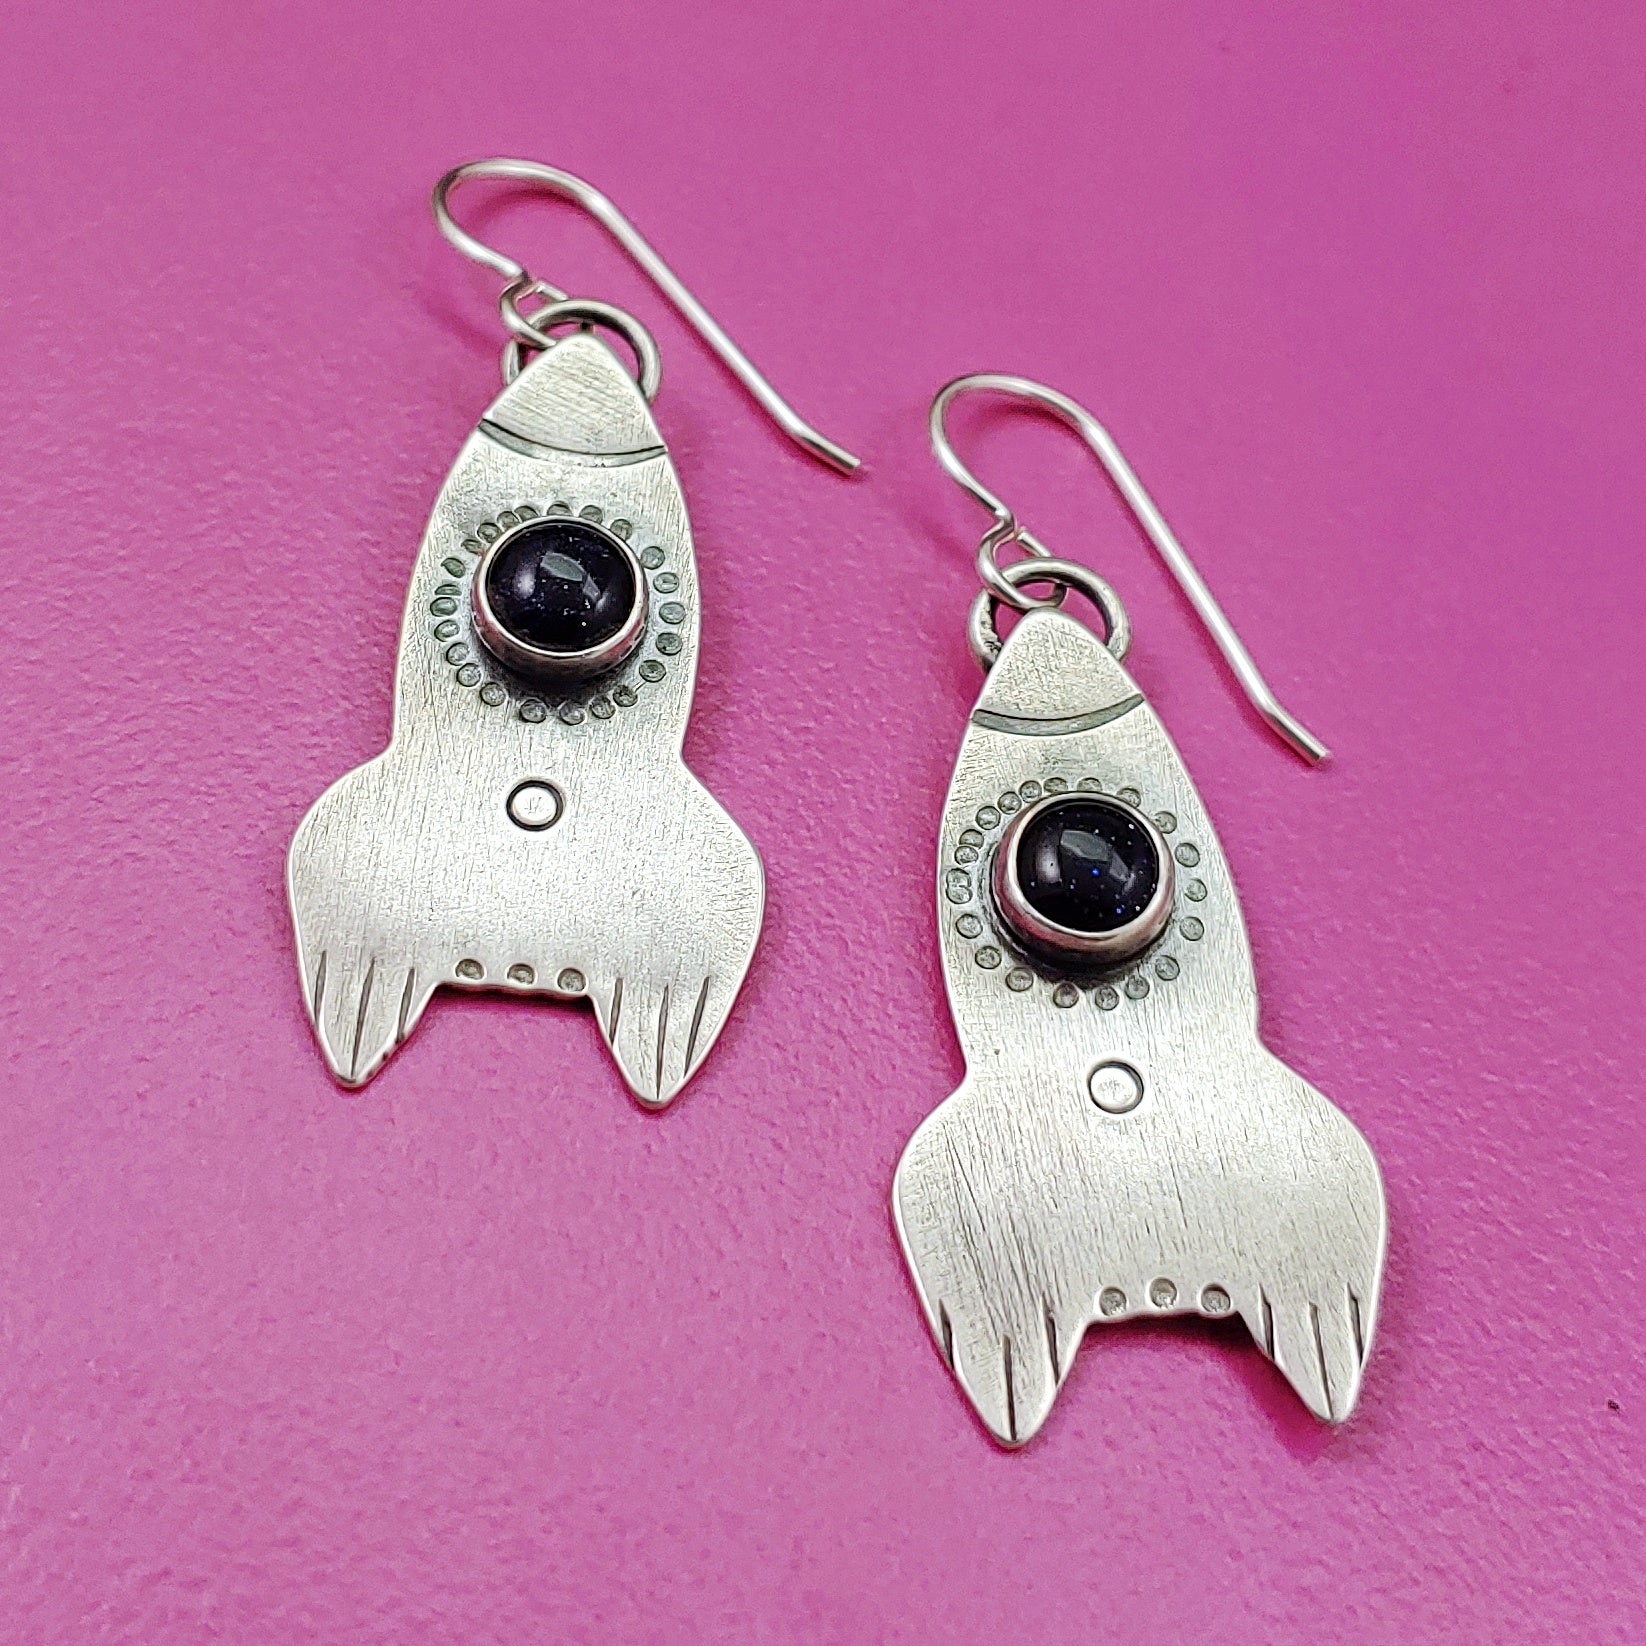 Rocket ship earrings in sterling silver on pink bacground